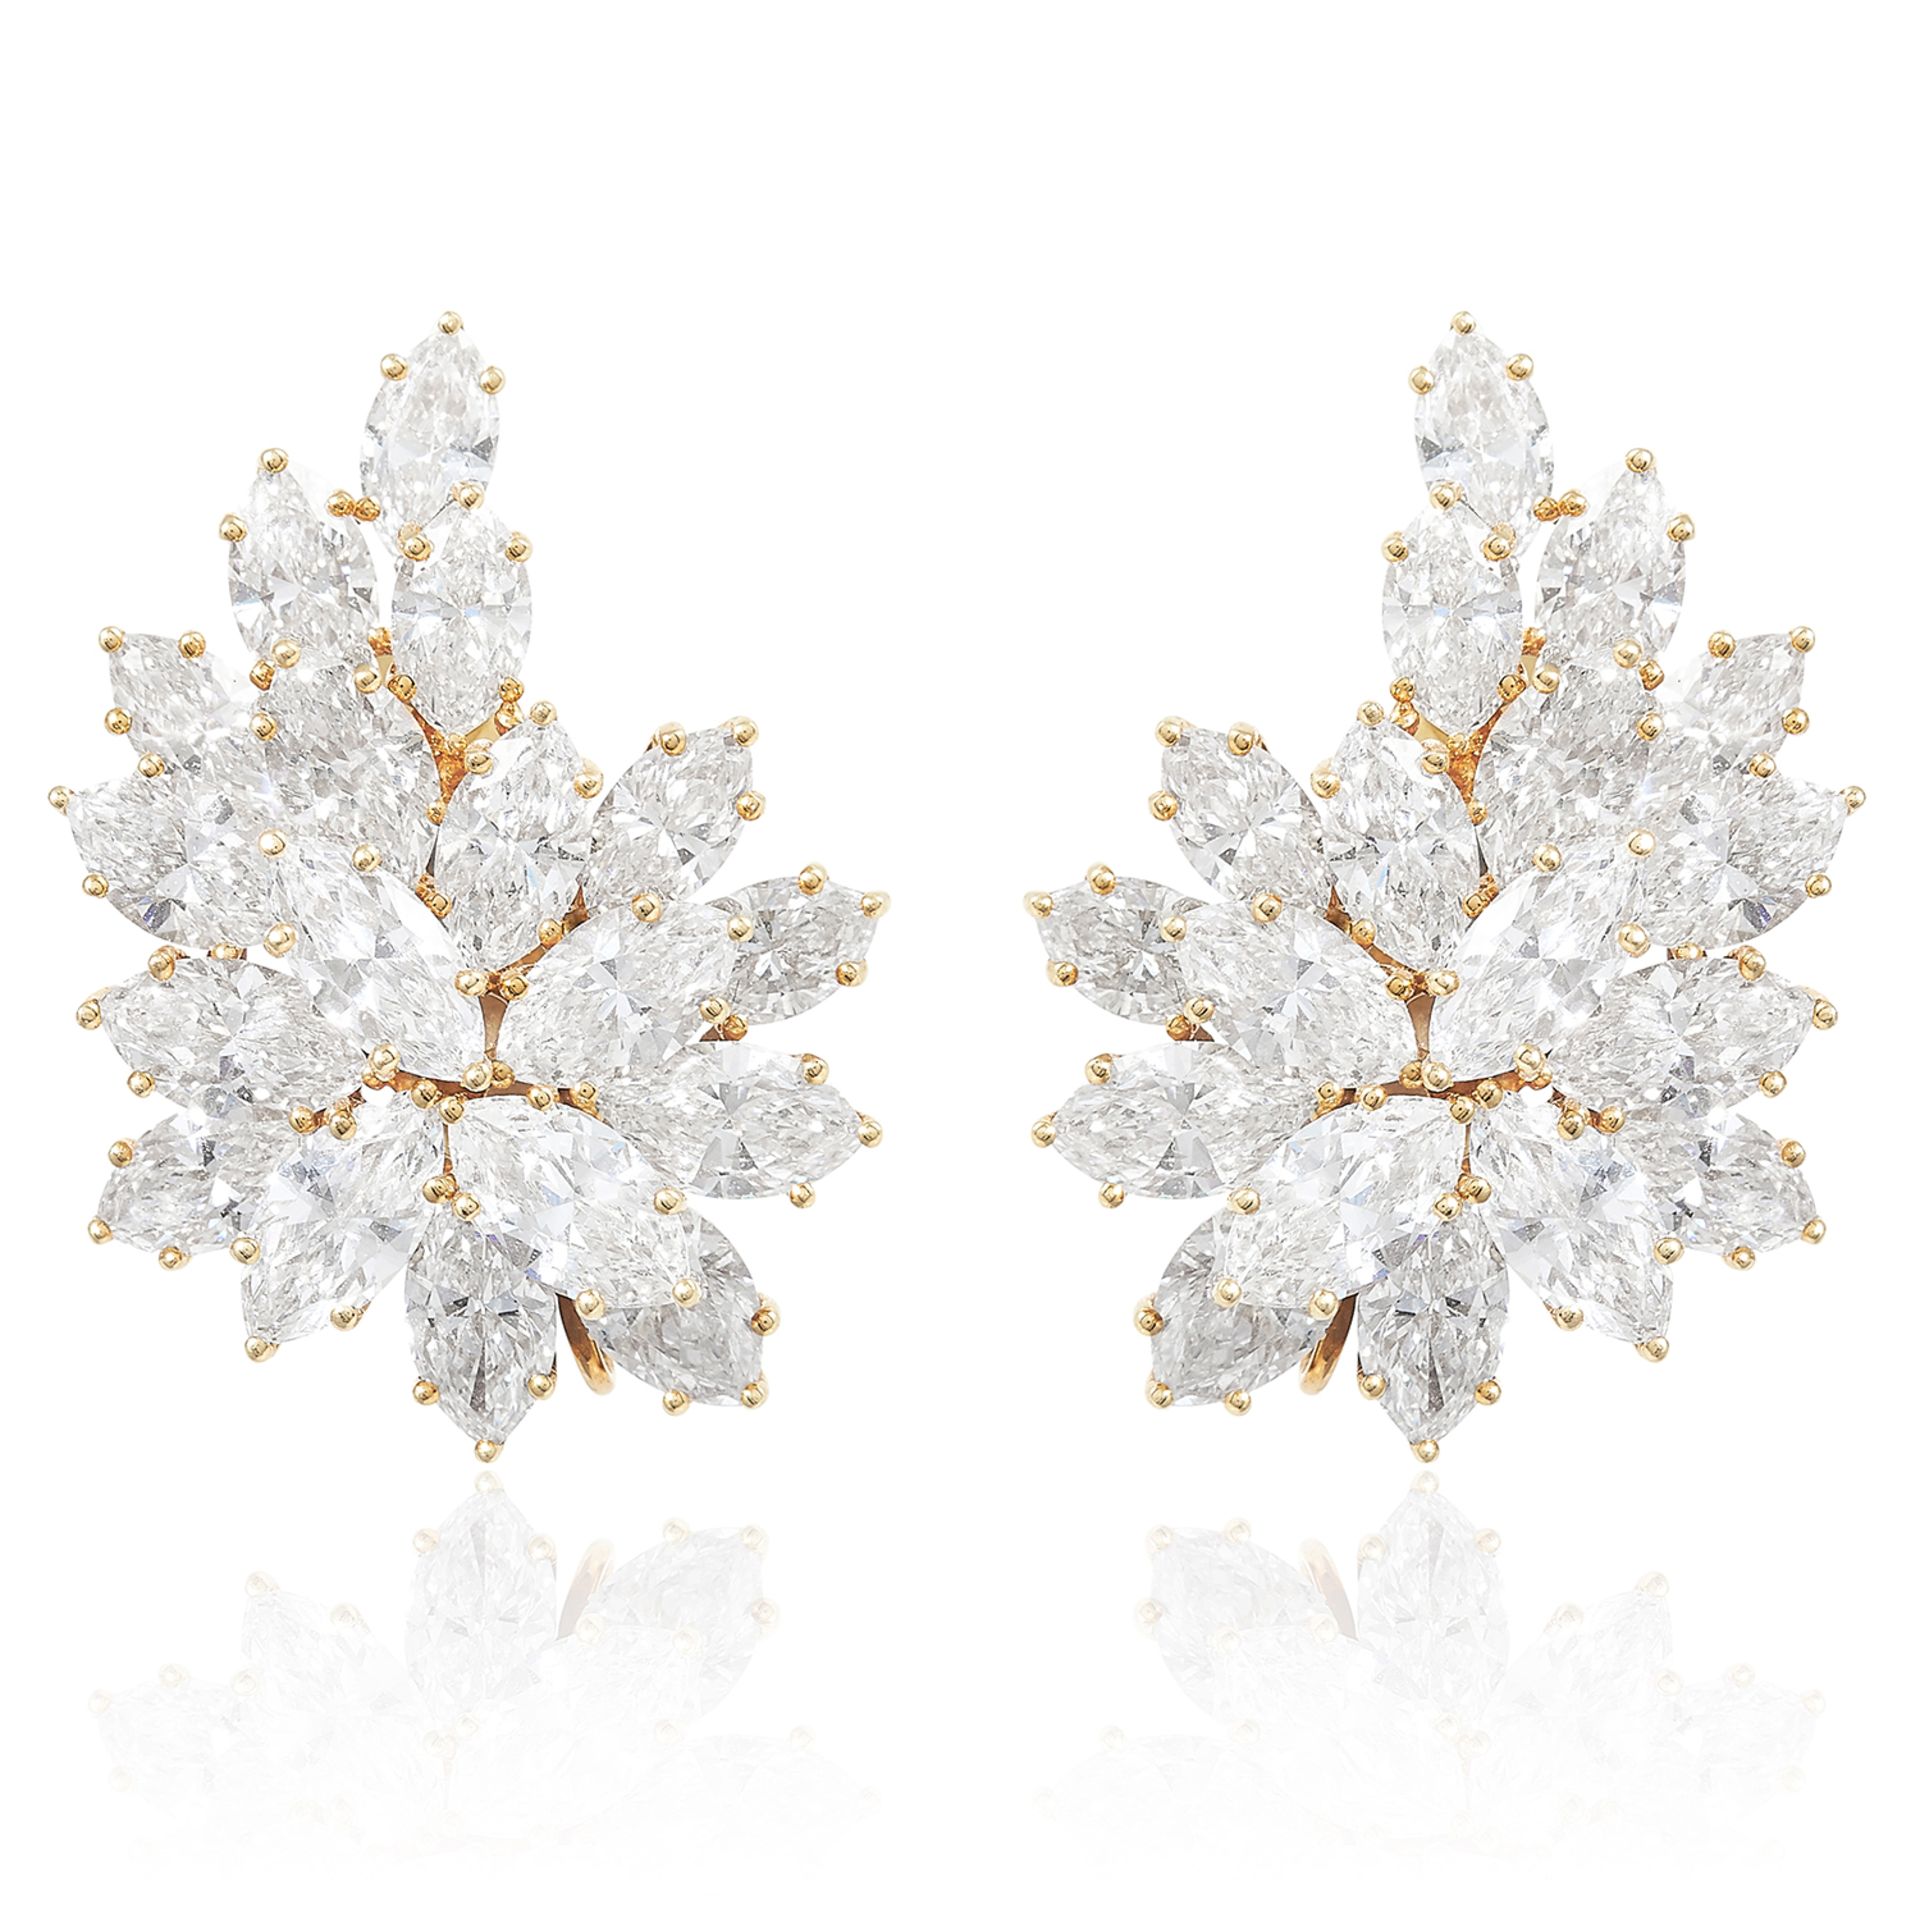 A PAIR OF 19.0 CARAT DIAMOND EARRINGS, CARTIER in 18ct yellow gold, each designed as a cluster of